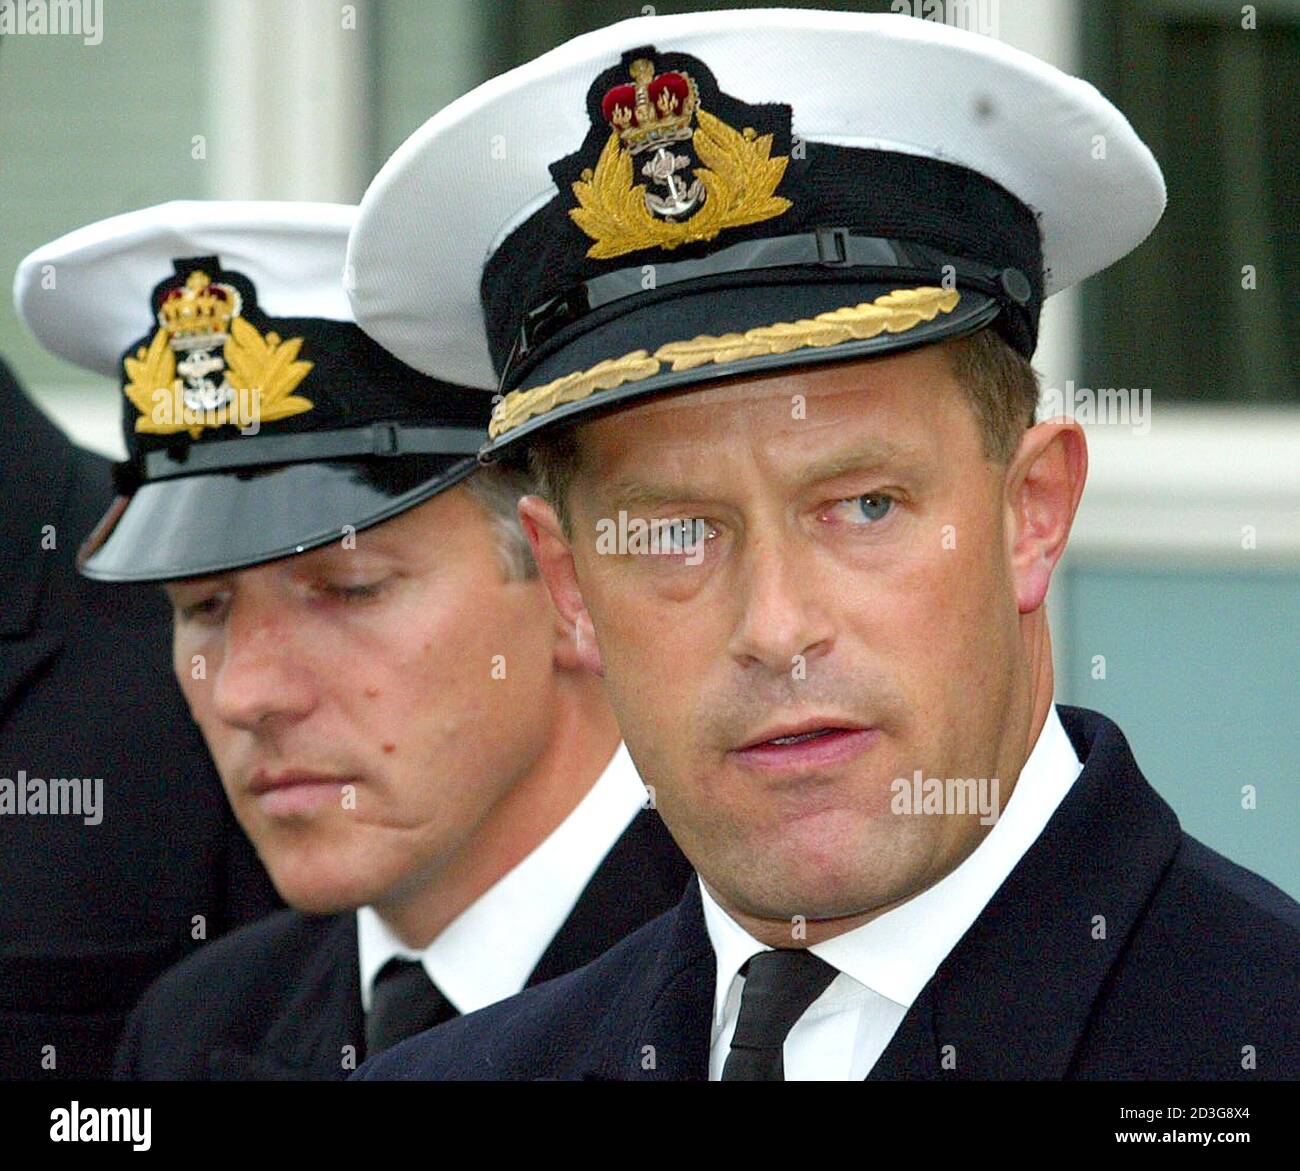 Lieutenant Commander John Lea and Commander Richard Farrington (R) address the media after a court martial hearing at Portsmouth Naval Base, September 11, 2003. Commander Farrington was reprimanded for neglecting his duties and Lea was was dismissed from his duties on Thursday after their vessel HMS Nottingham ran aground near Lord Howe Island, 200 miles off the coast of Australia in July 2002, tearing a 100 ft hole down the side of the Type 42 destroyer and incurring a 42 million pounds ($66, 851, 400) repair bill. REUTERS/Lee Besford  MD/JV Stock Photo